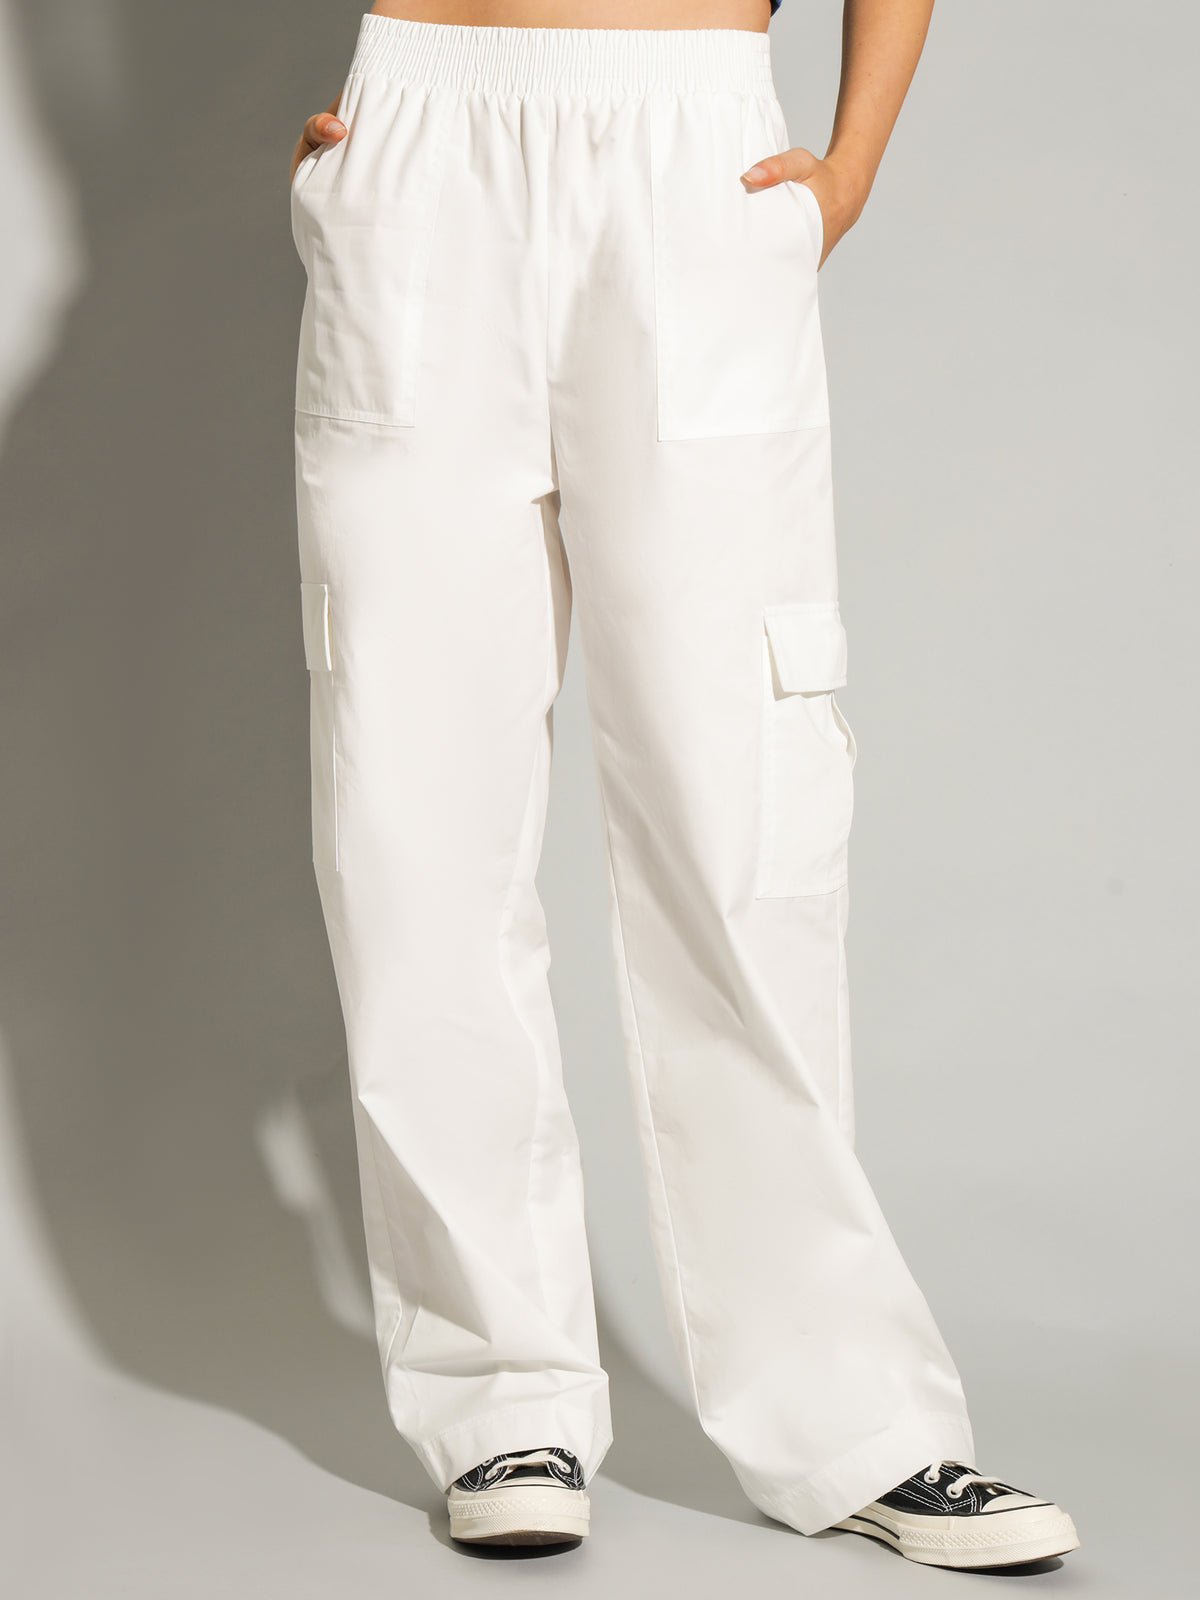 Down Town Cargo Pants in Off White